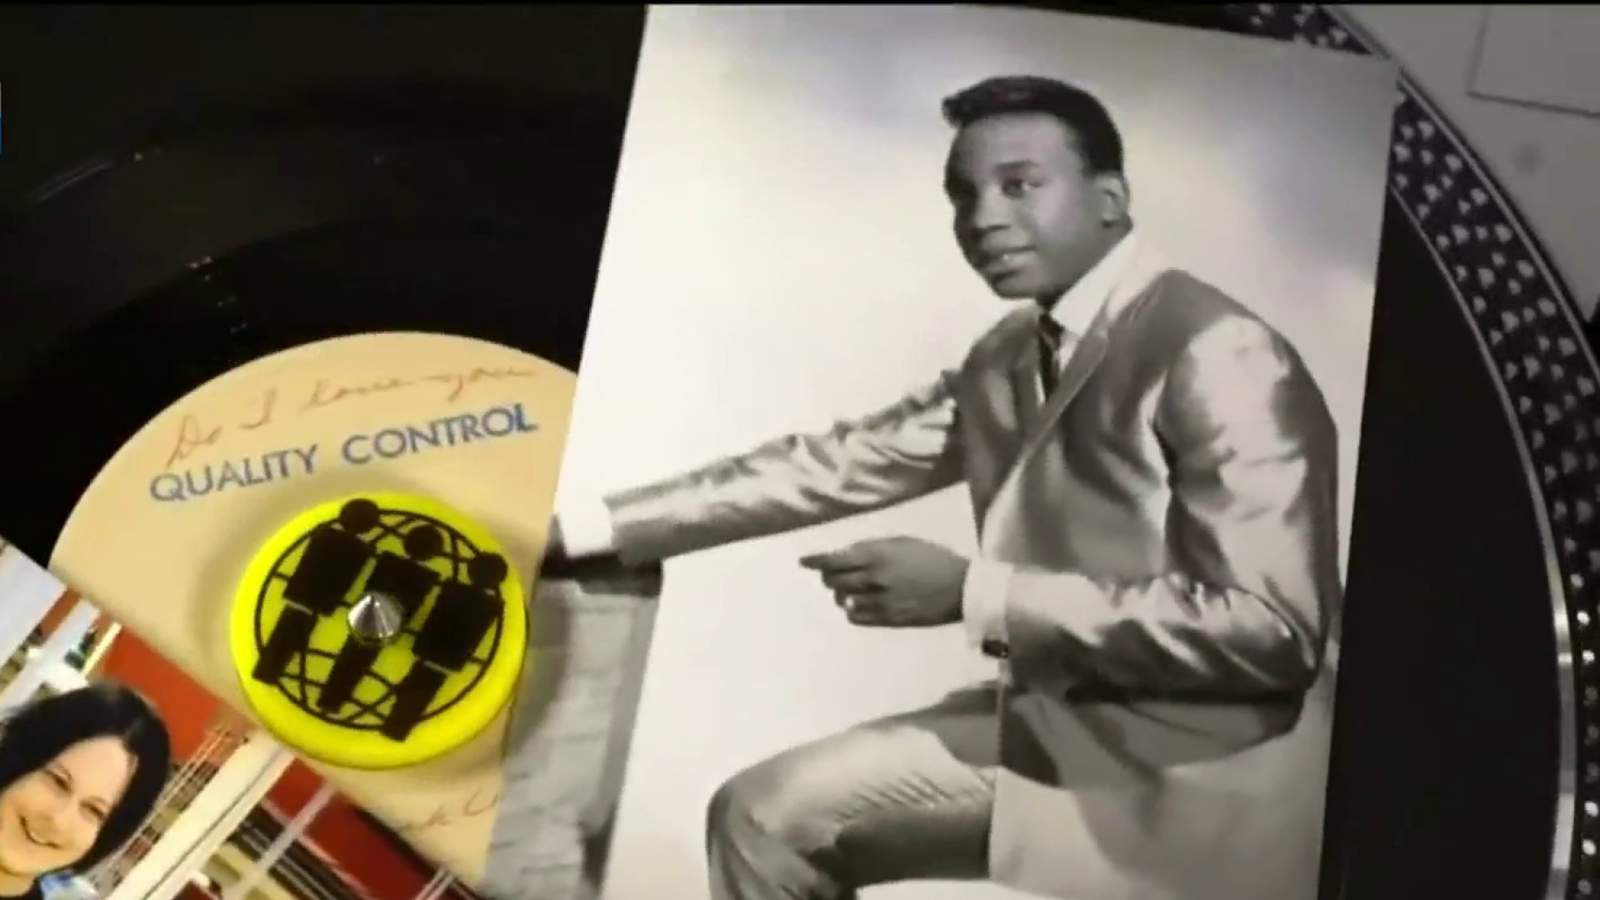 The Detroit connection to one of the worlds rarest records